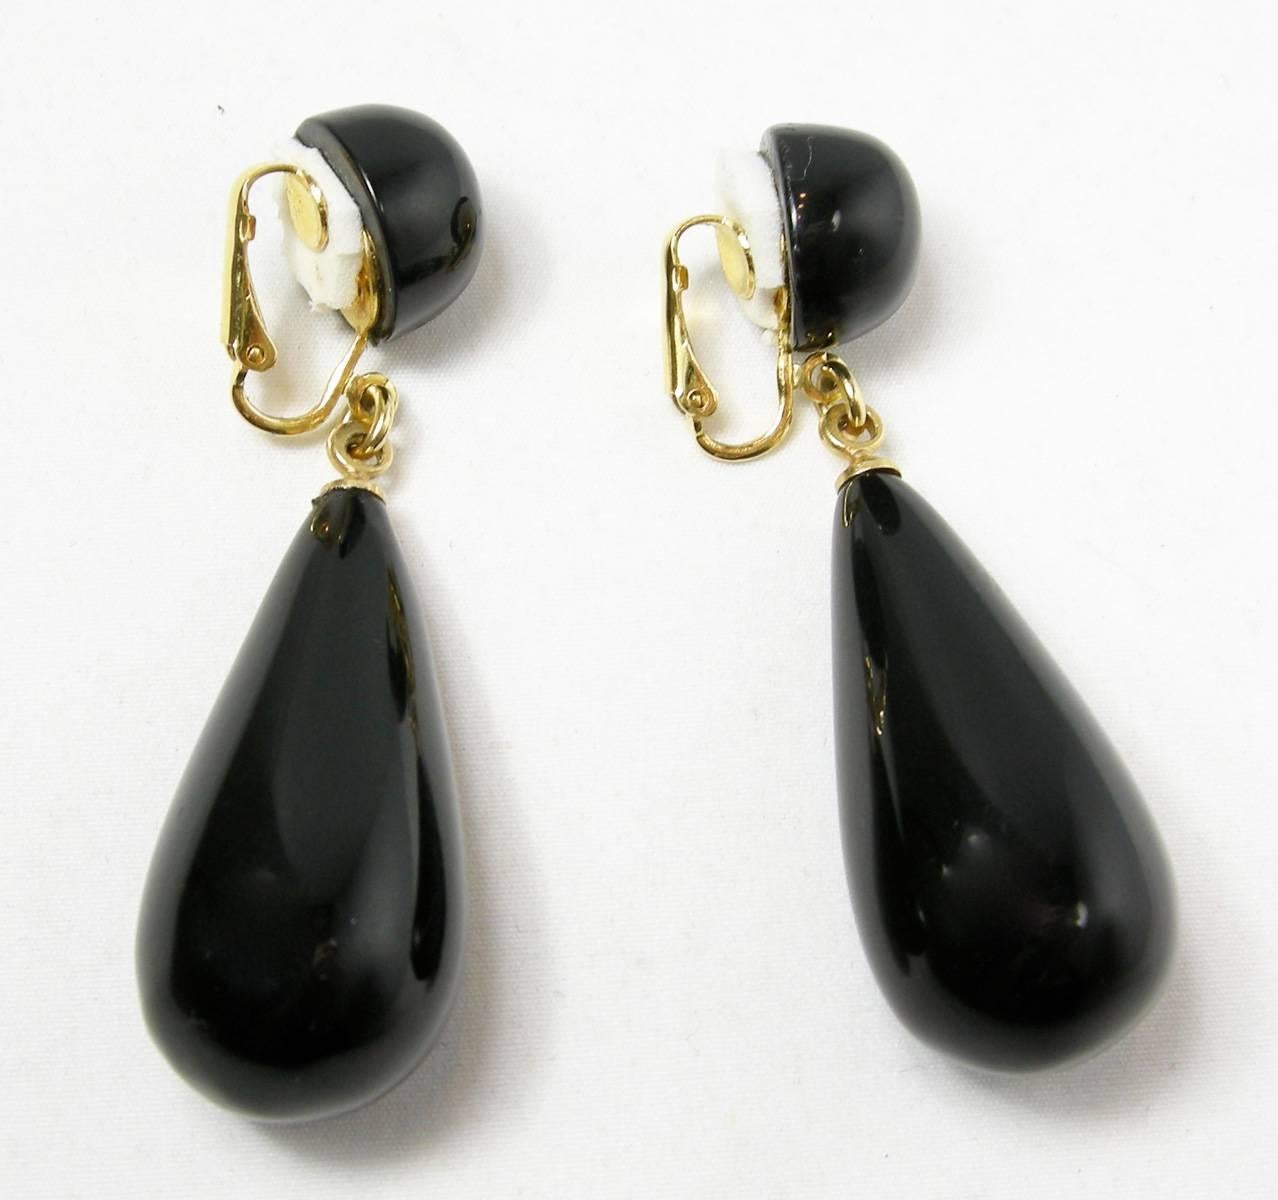 Perfect for anytime are these dangling clip earrings from Kenneth Jay Lane.  These black teardrop earrings measure 2-1/4” x 3/8” in a gold tone setting.  They are signed “Kenneth Lane” and in excellent condition.  